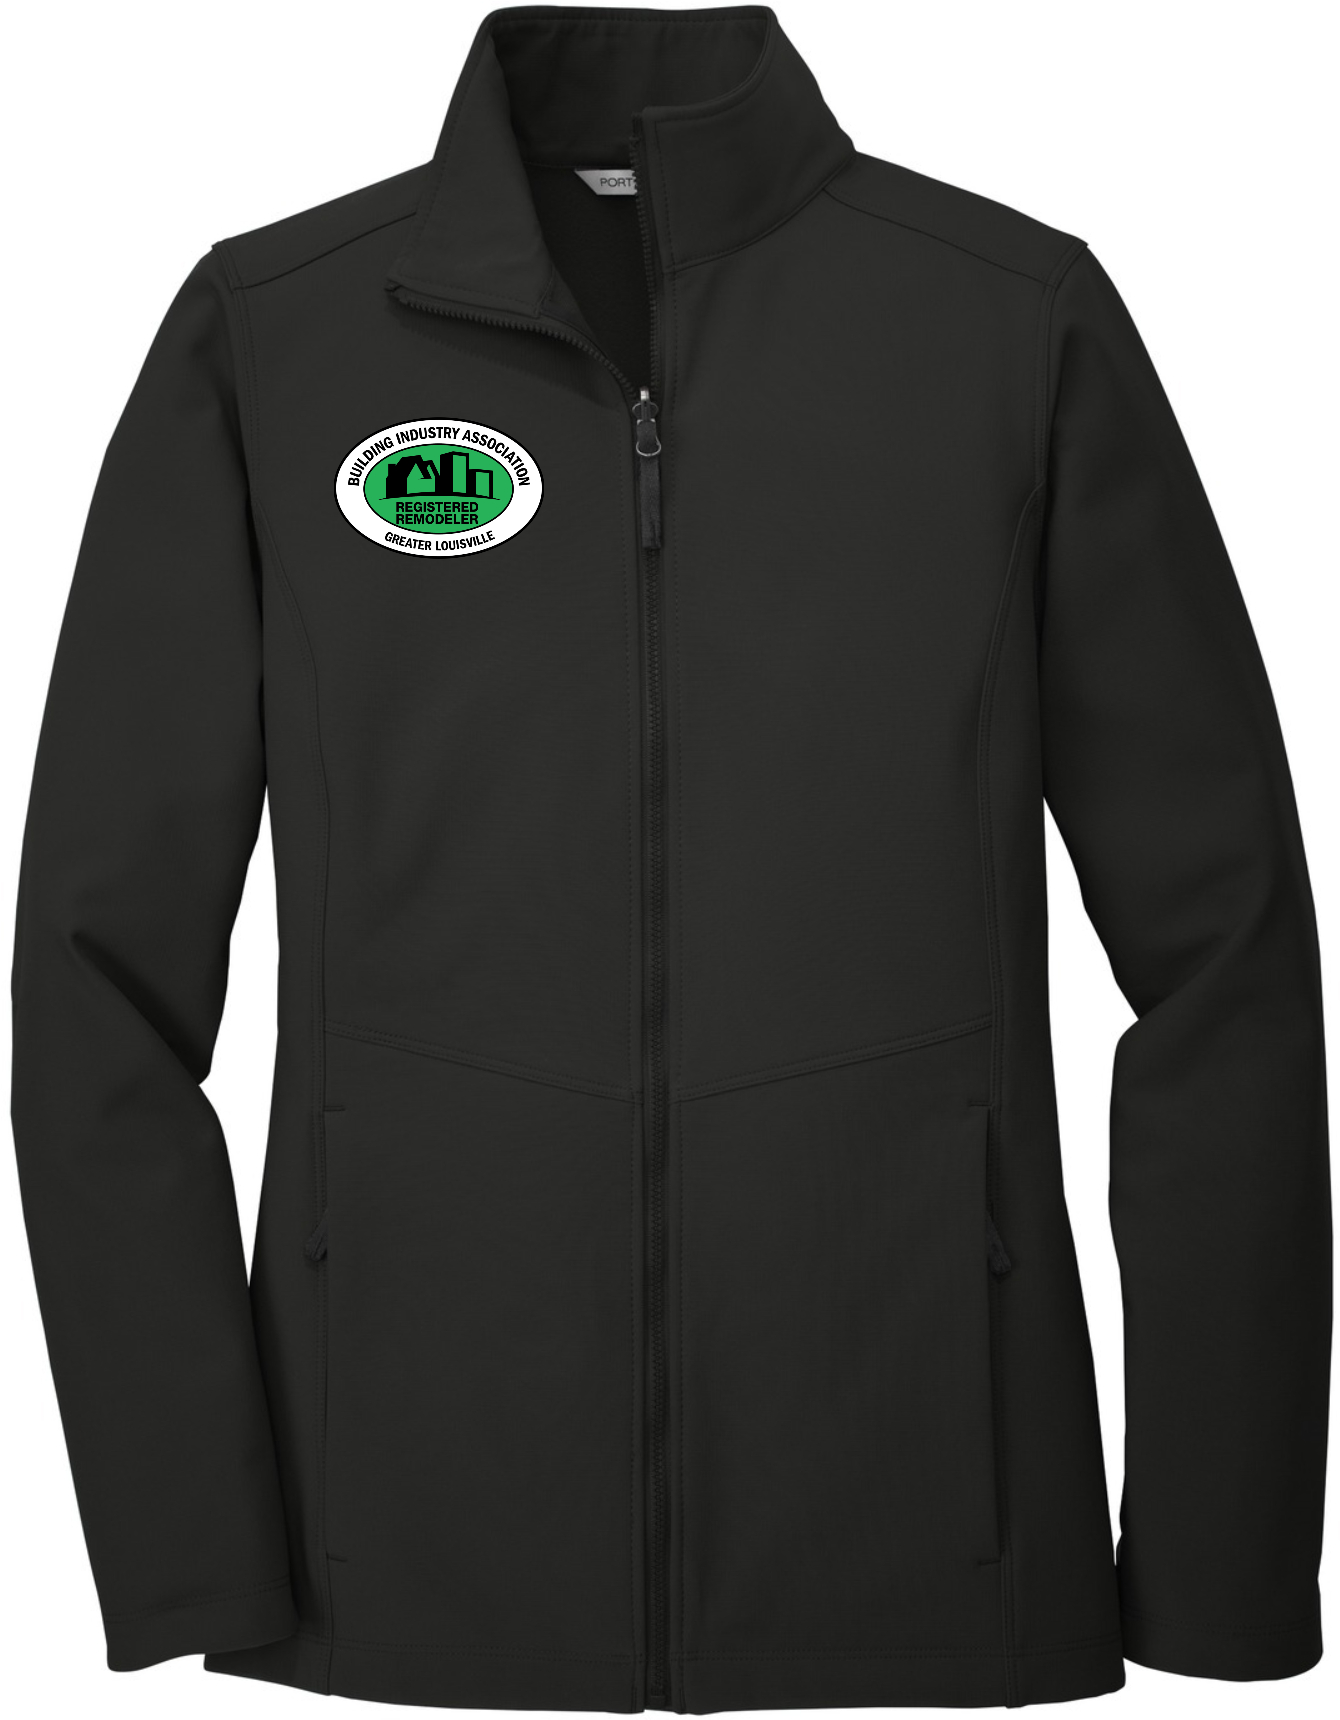 Registered Remodeler - Port Authority ® Ladies Collective Soft Shell Jacket - L901